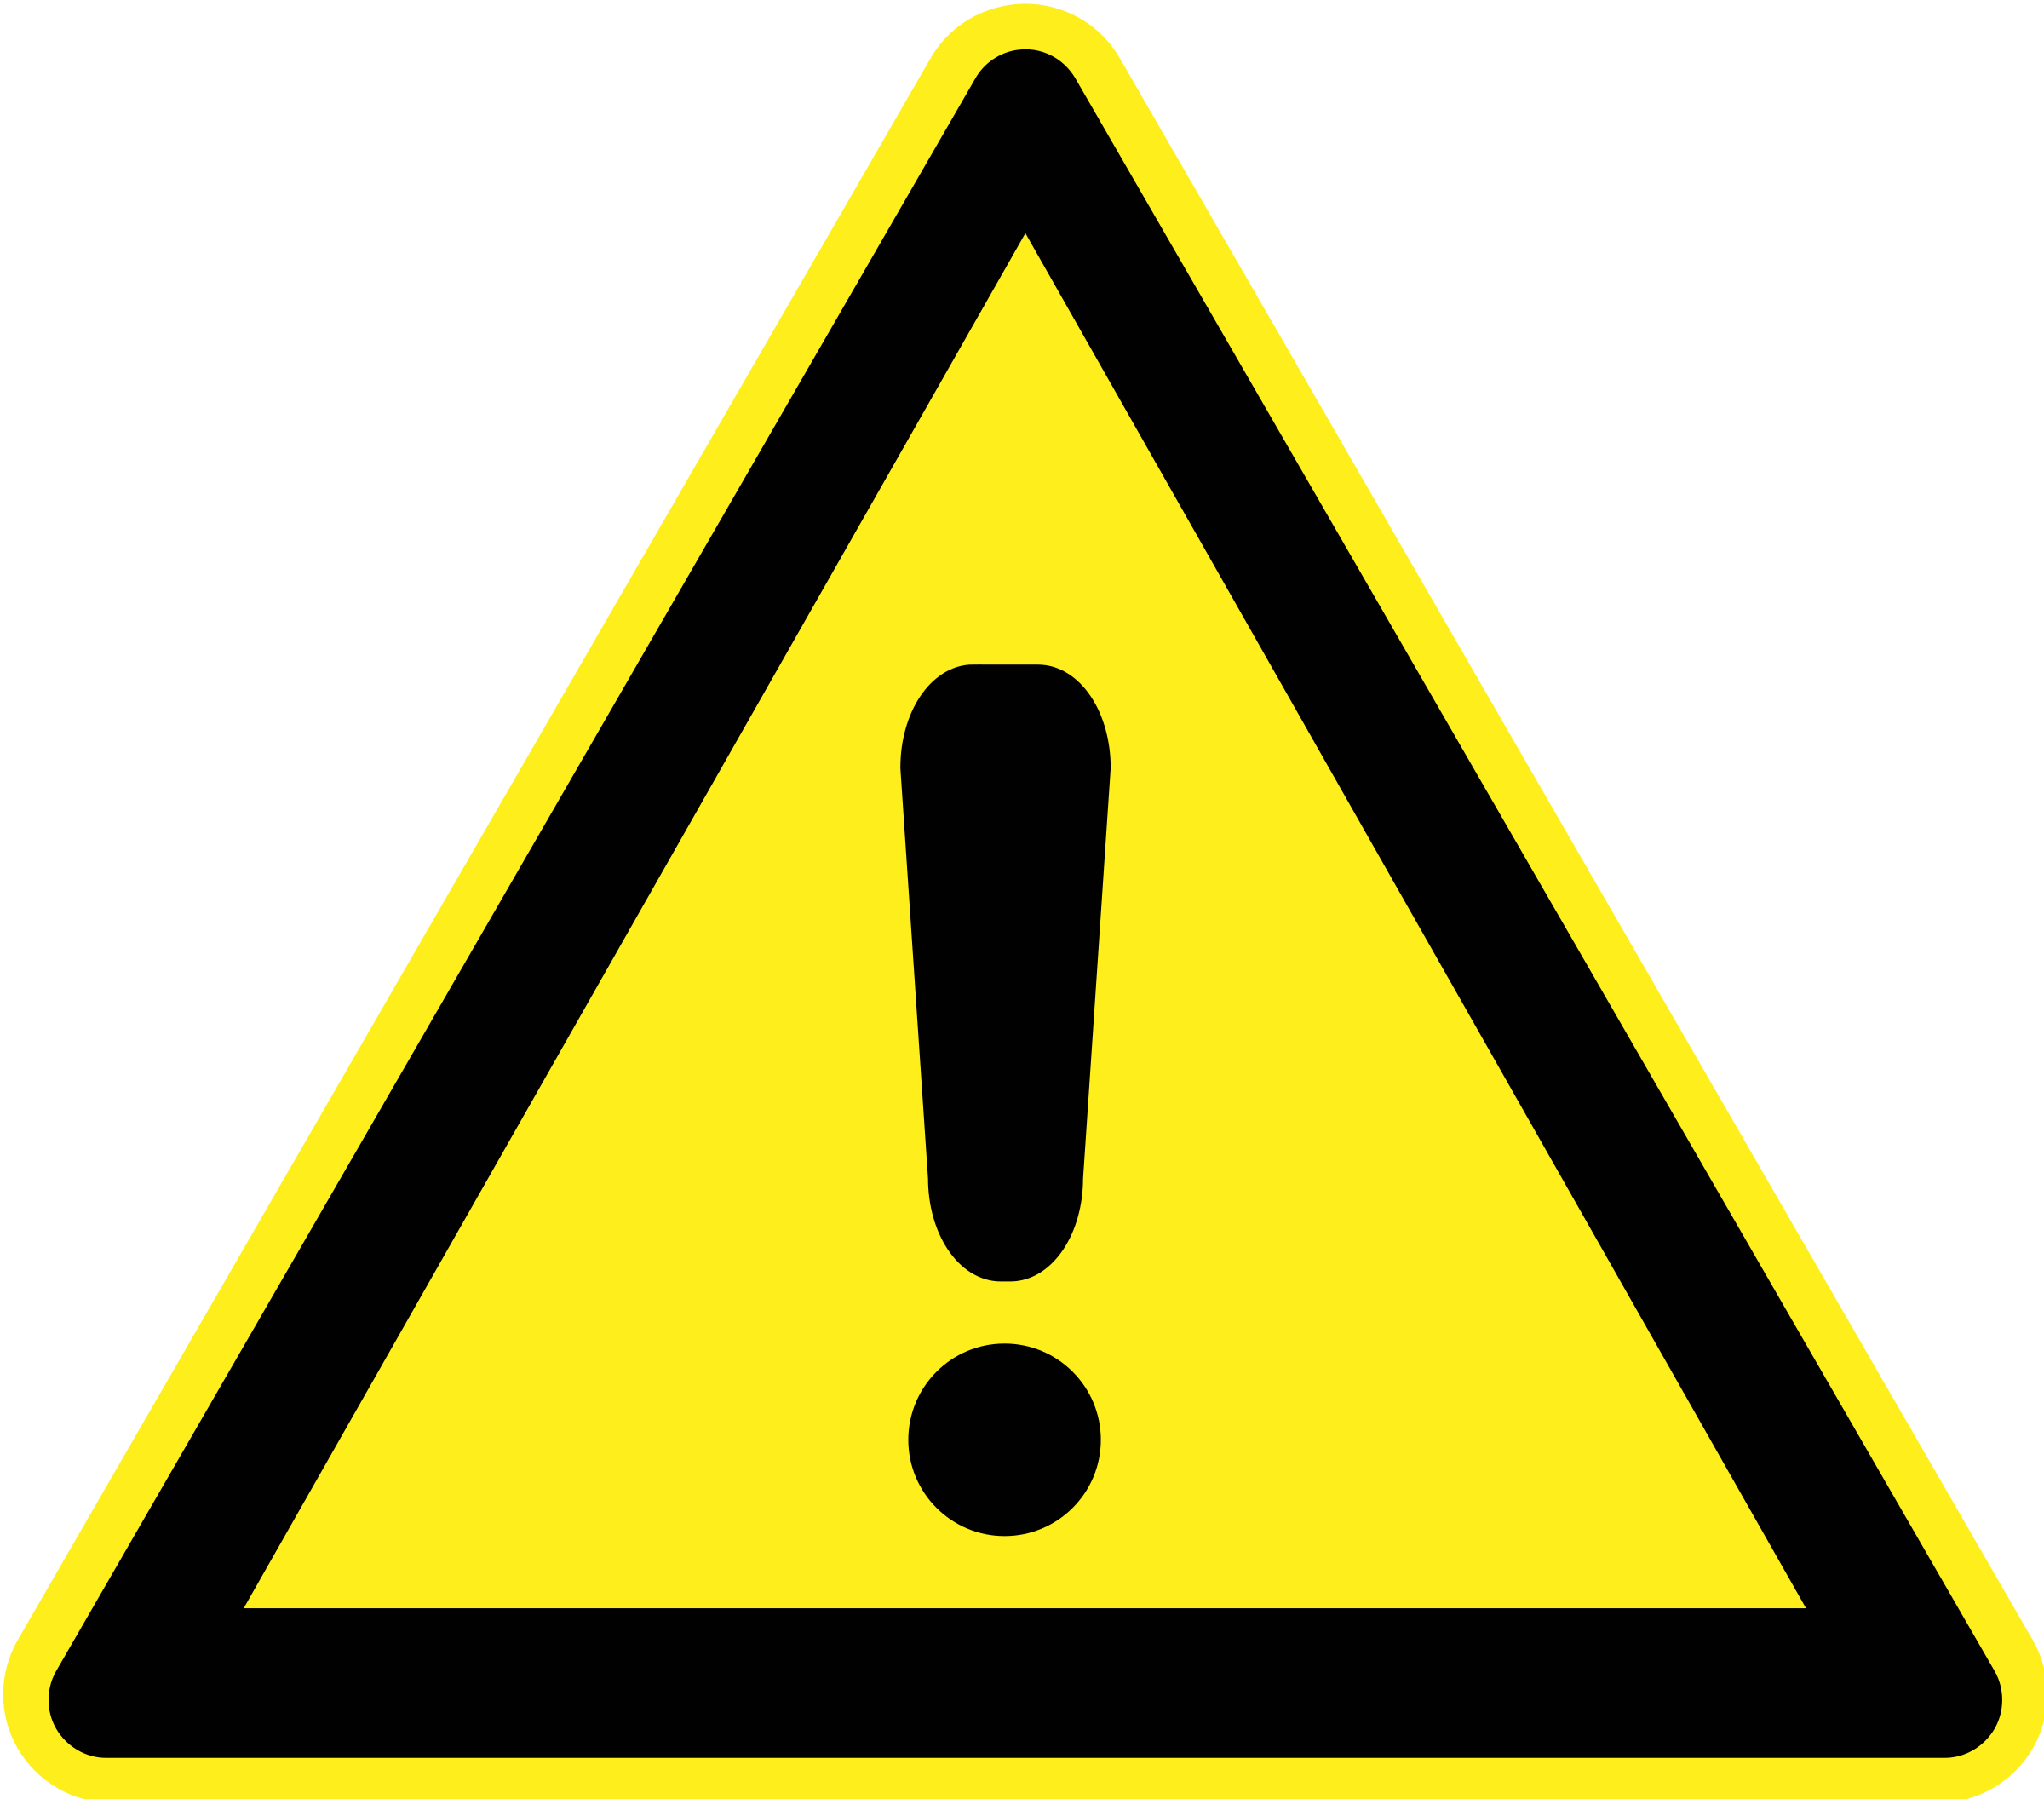 Danger clipart contraindication. Warning sign free on